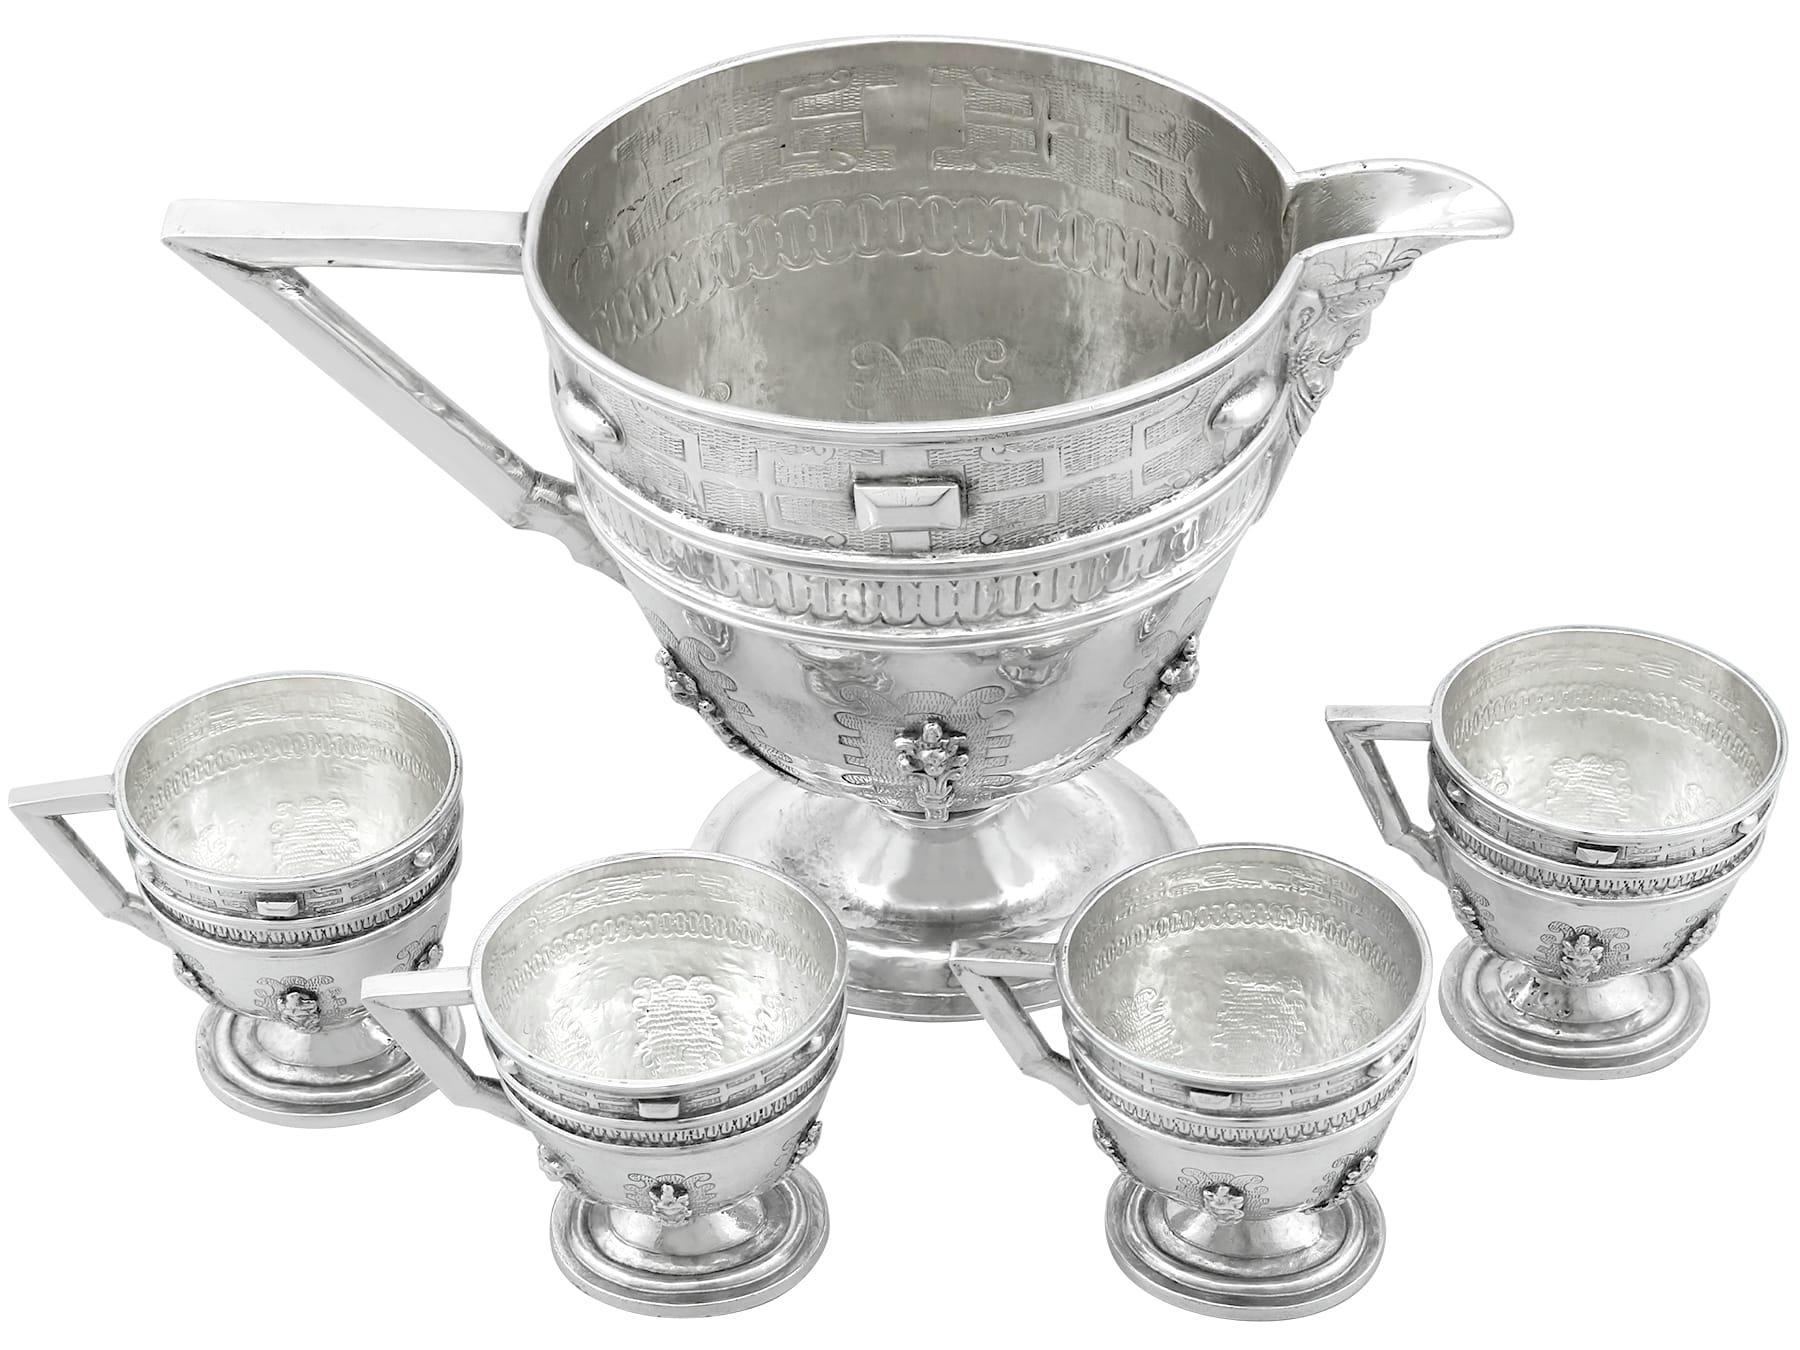 An exceptional, fine and impressive antique Spanish silver jug with matching cups; an addition to our range of drinks related silverware

This exceptional 18th century Spanish silver set consists of a jug and four matching cups.

Each piece of